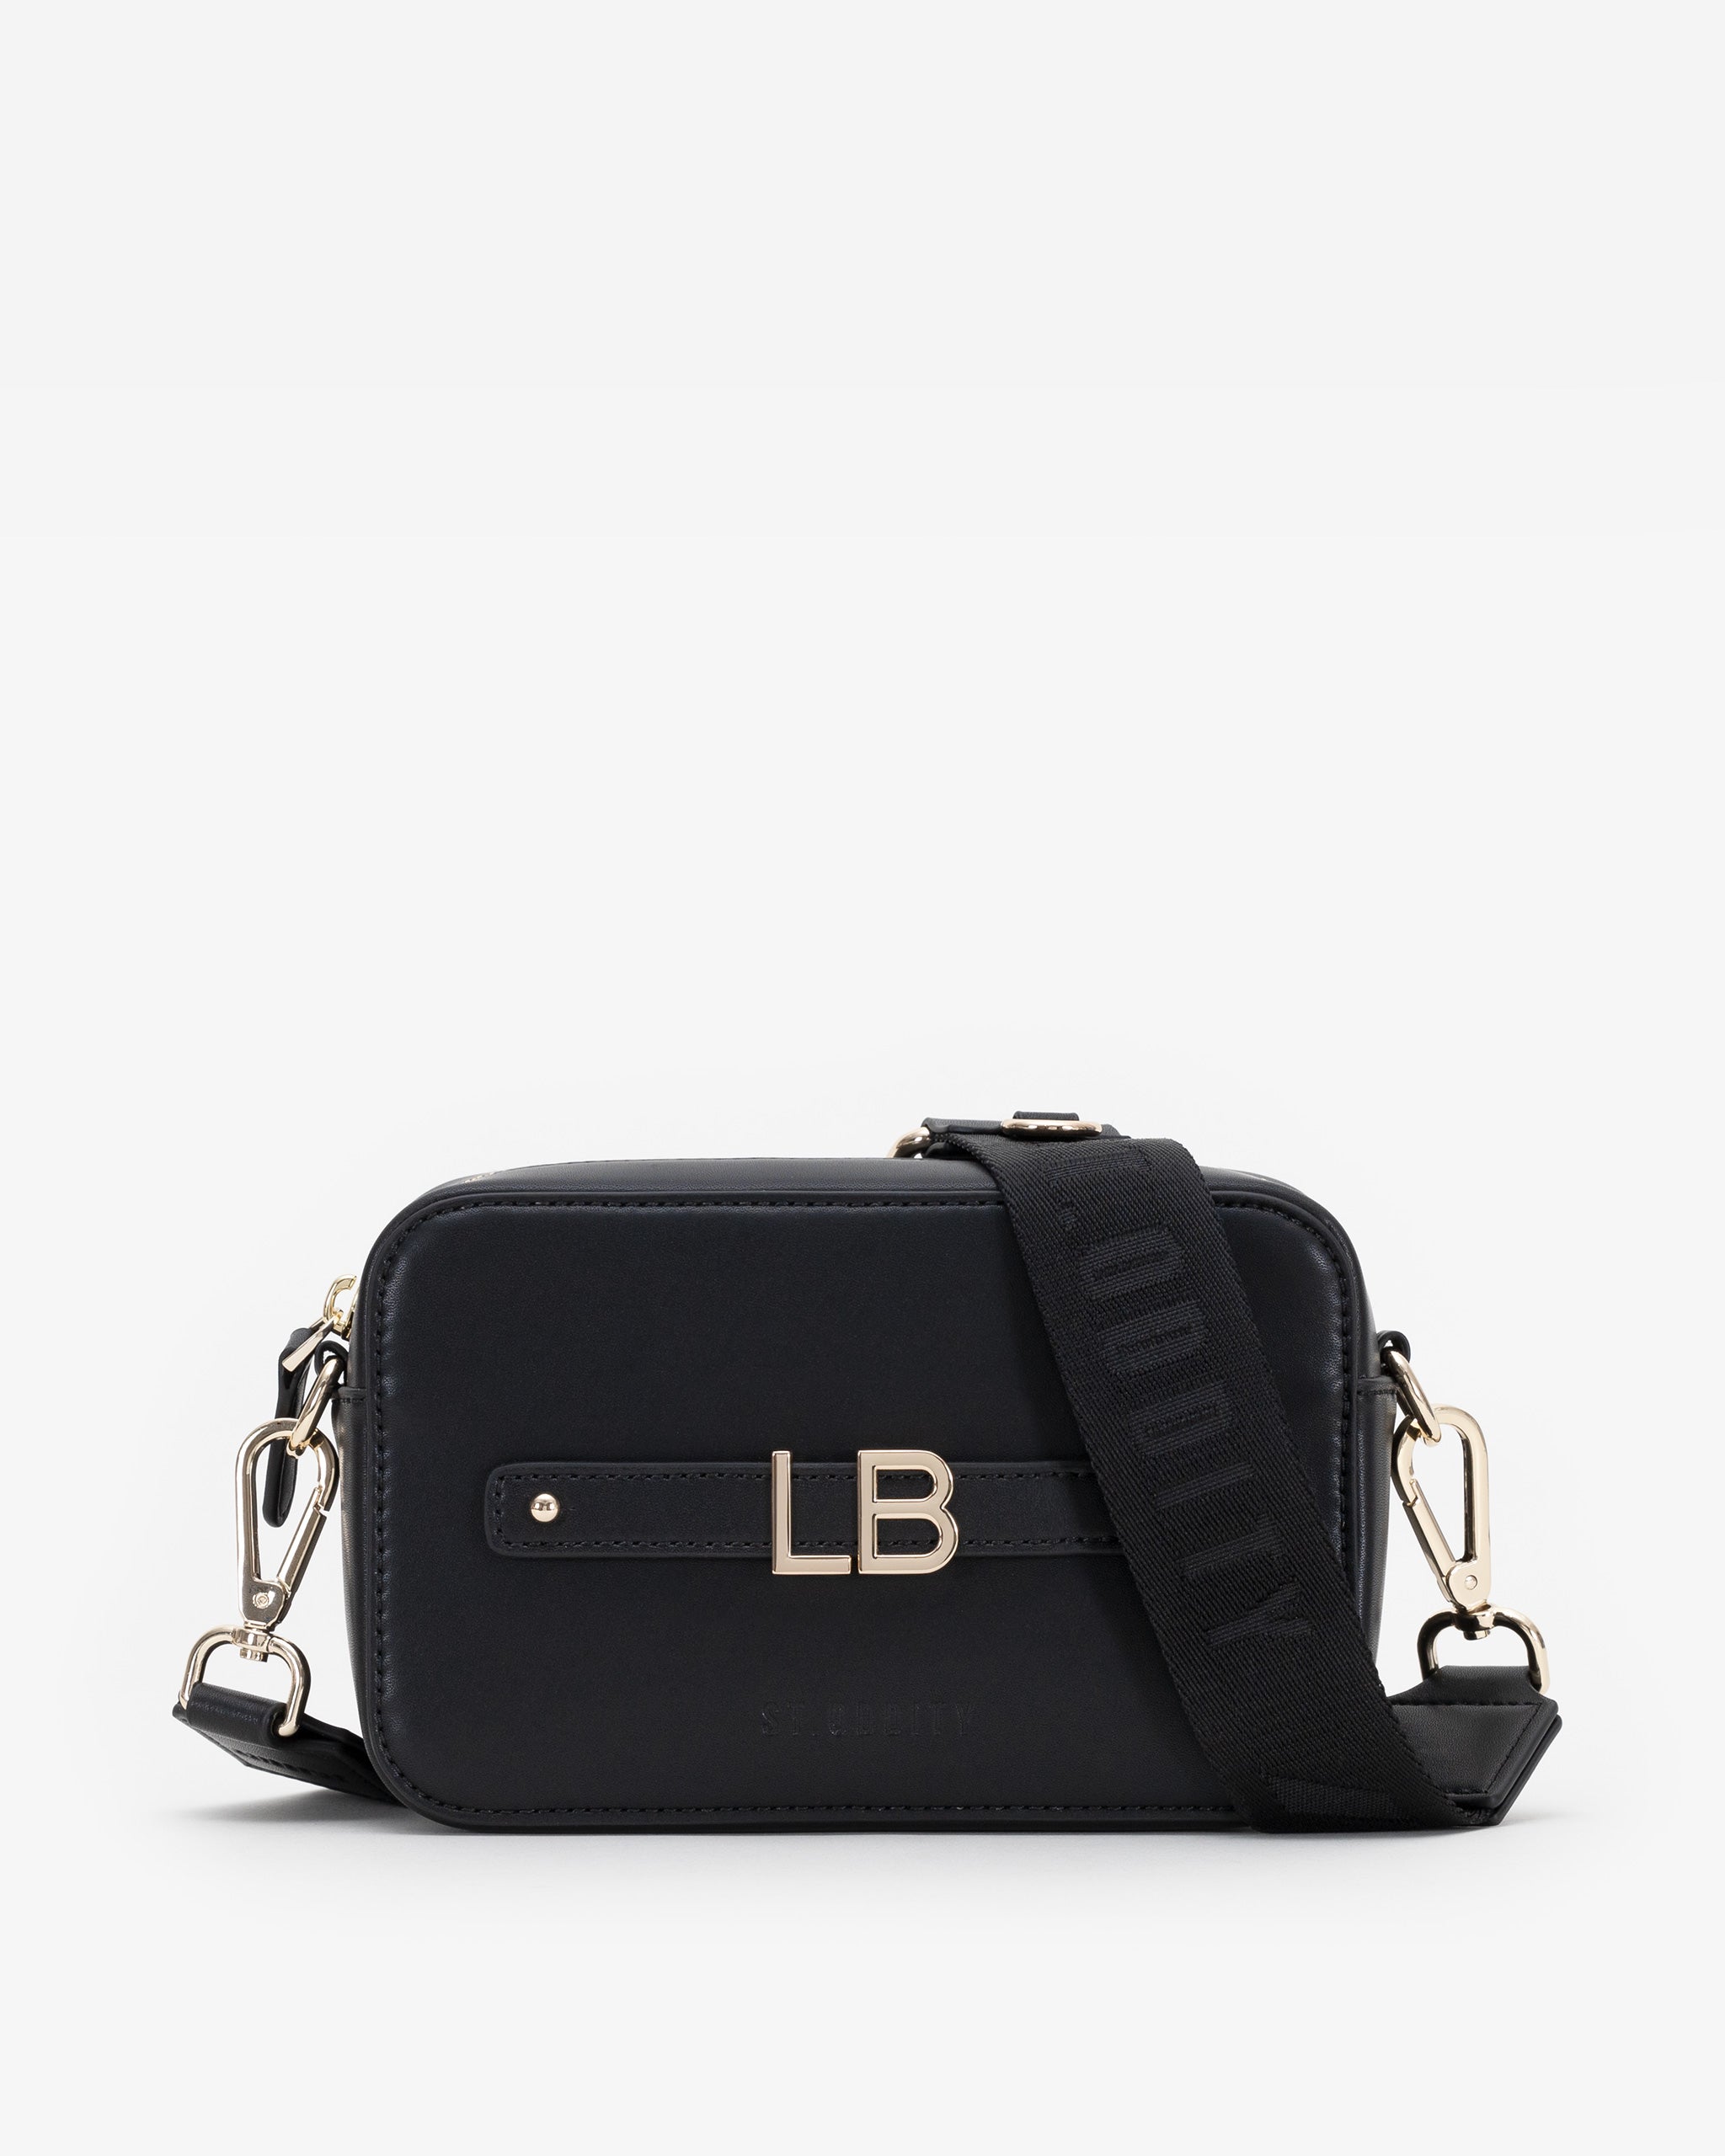 Zip Crossbody Bag in Black/Gold with Personalised Hardware